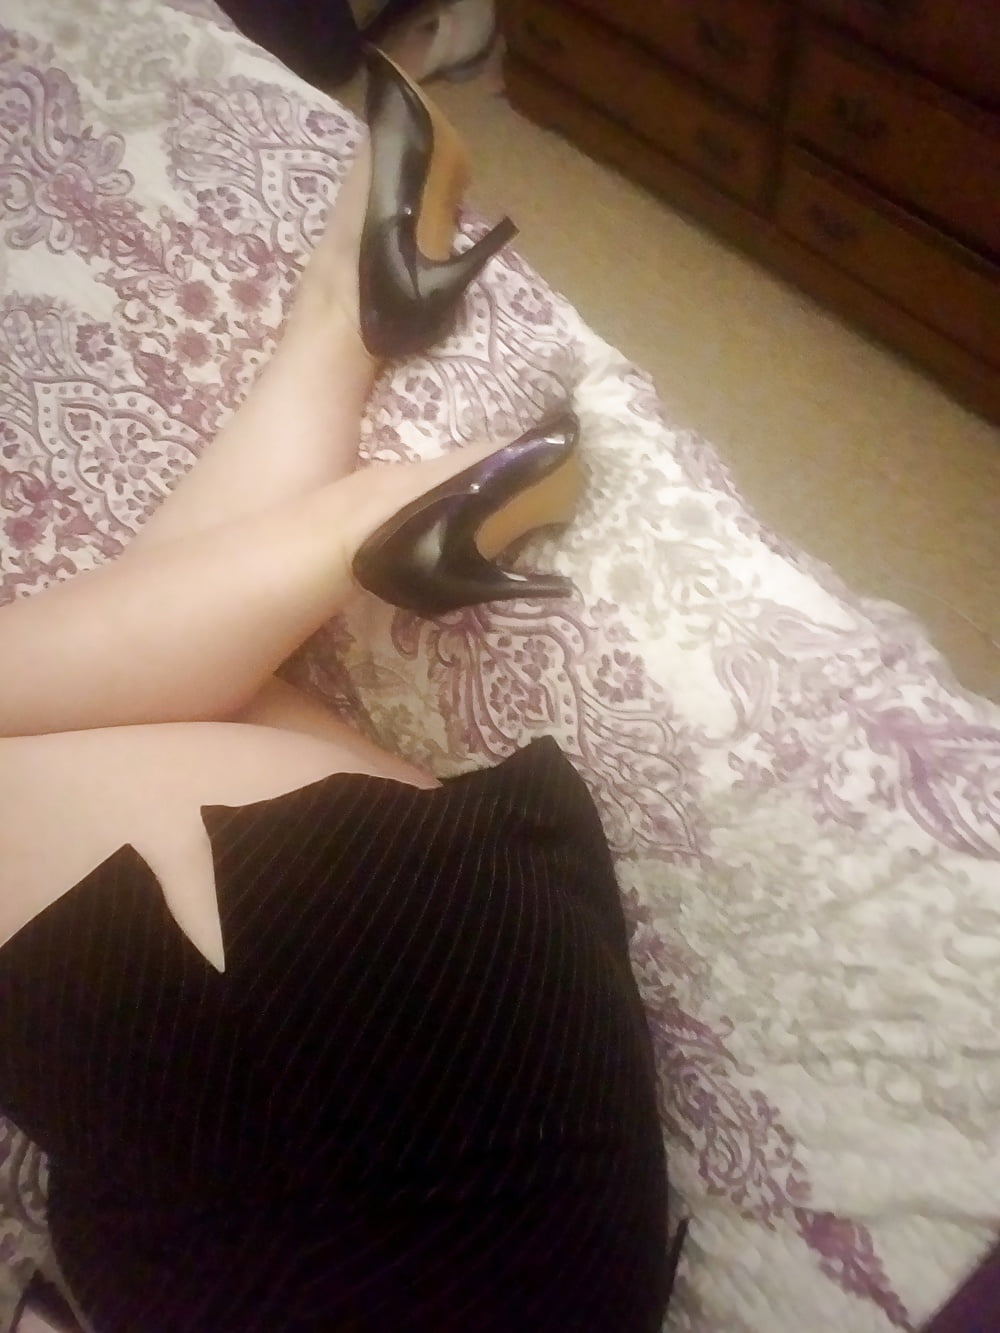 Wife in stockings and heels